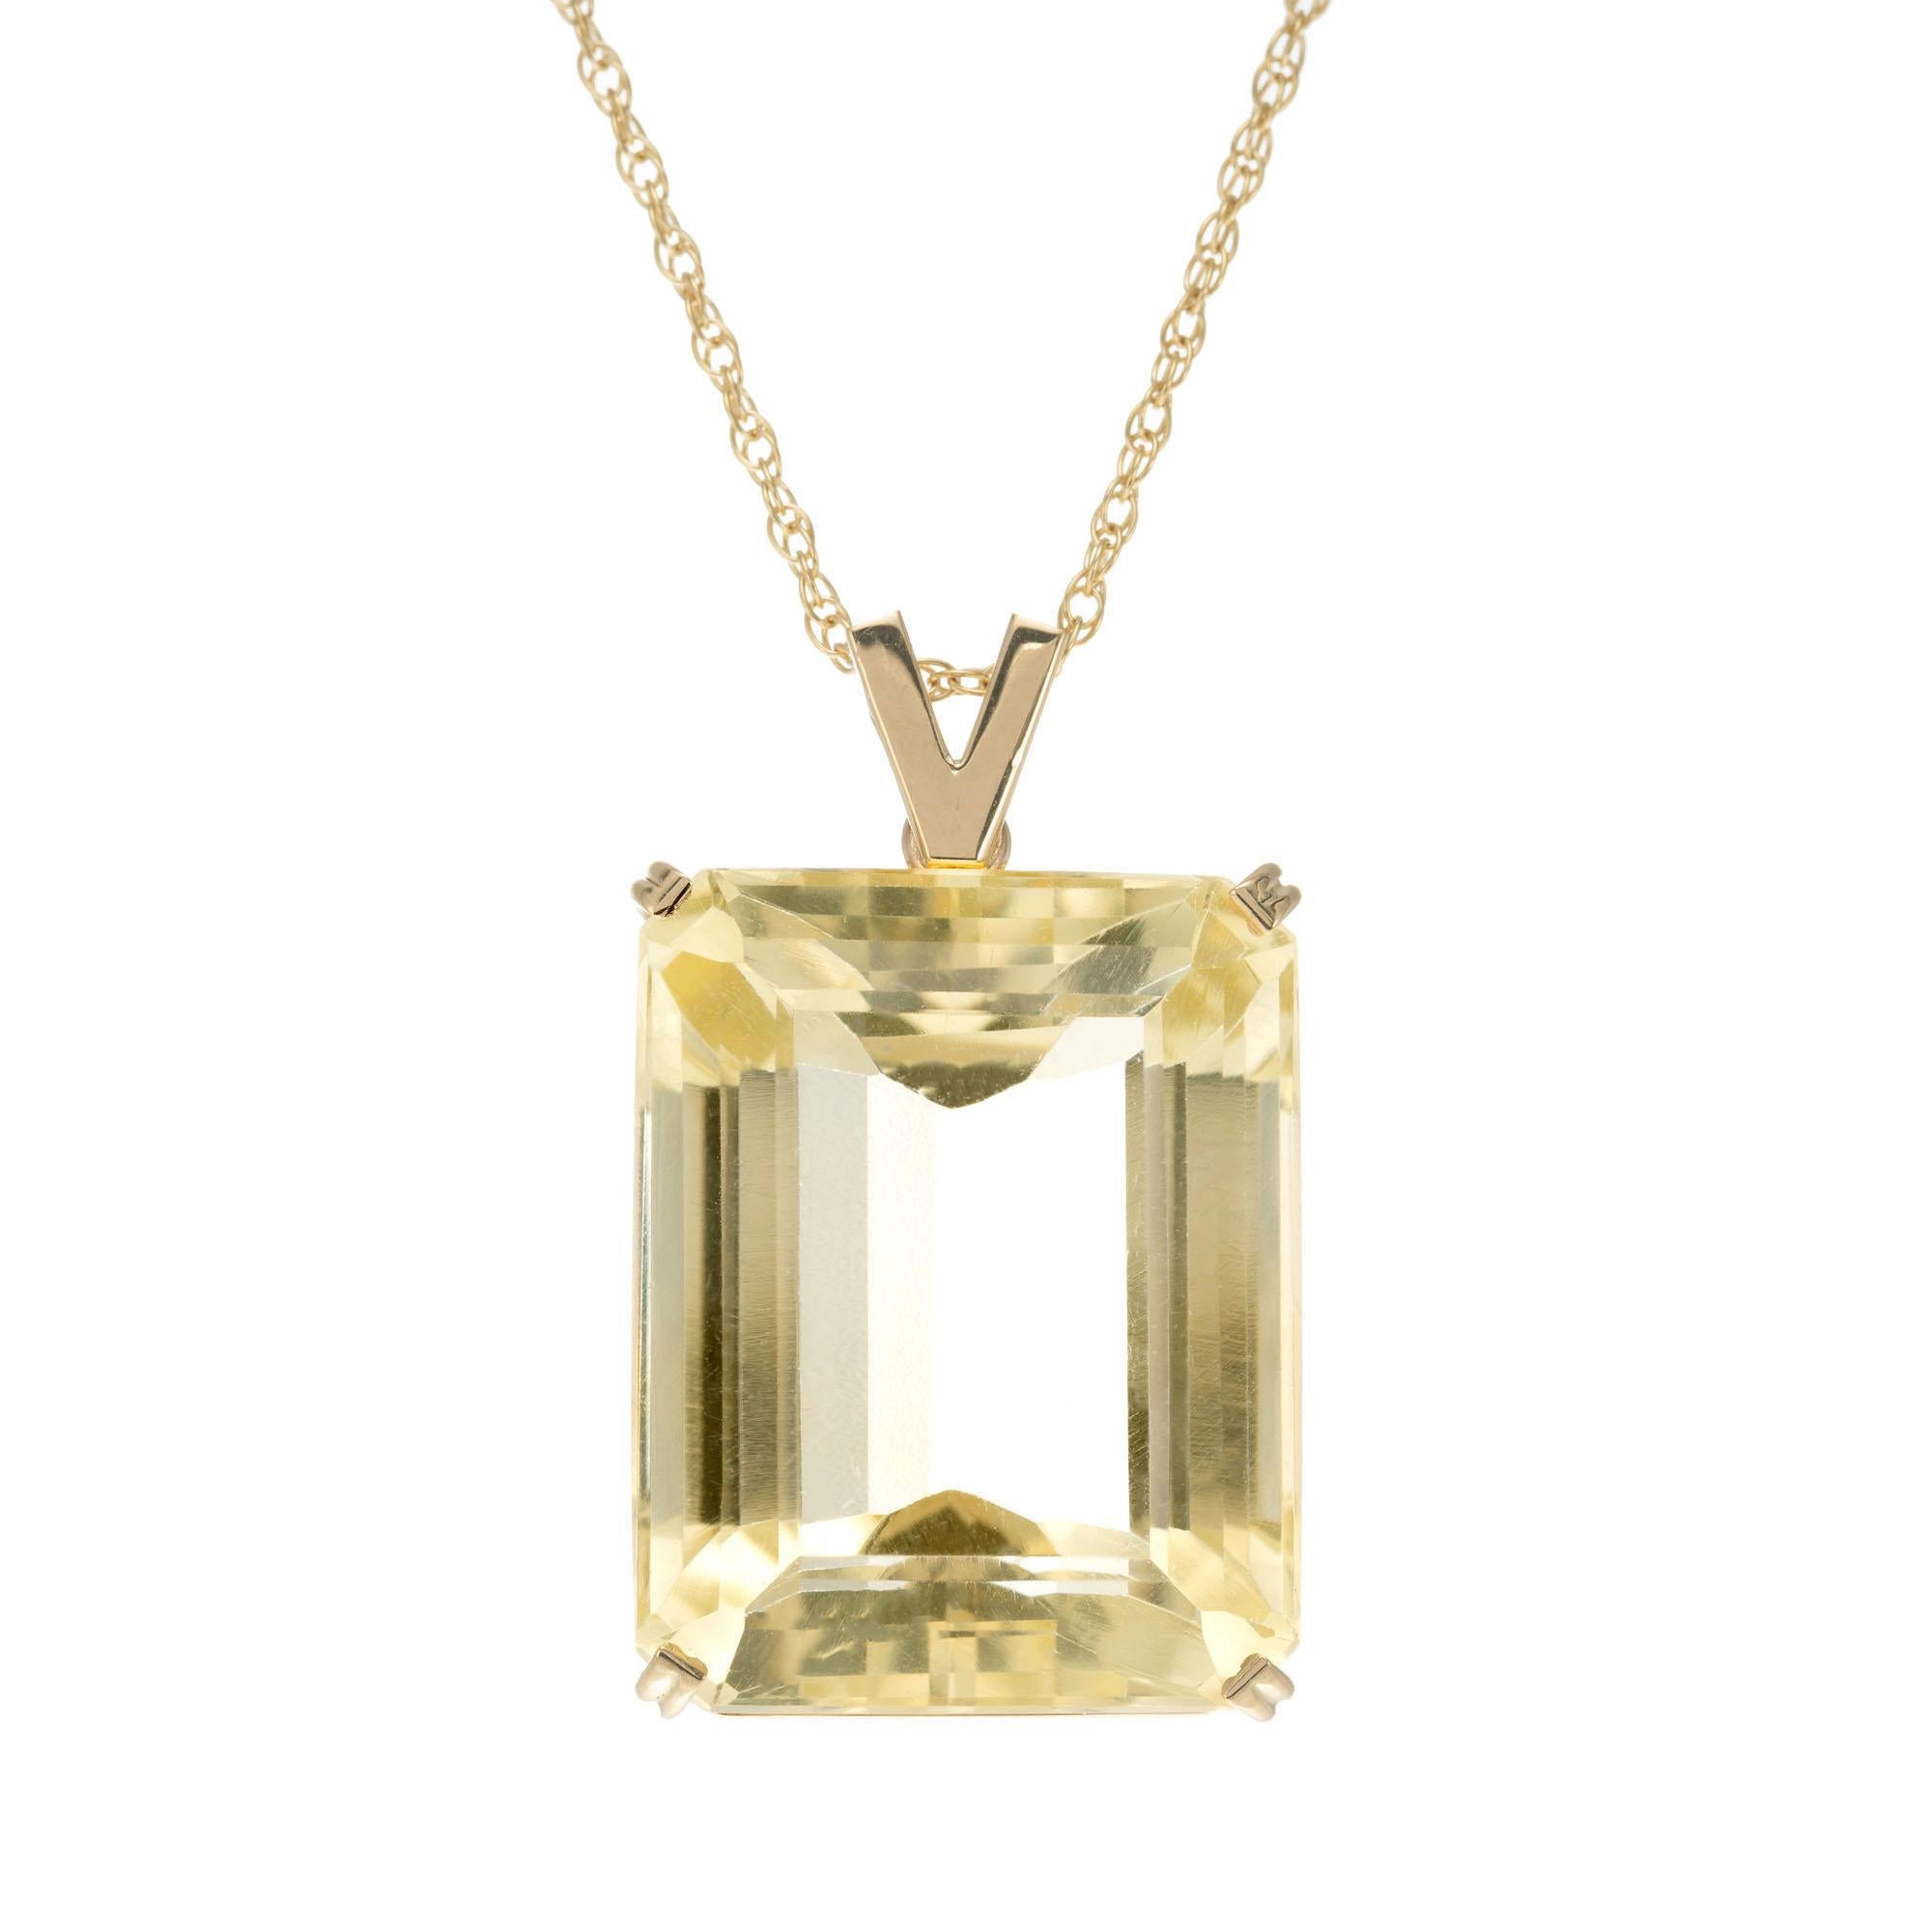 Soft yellow 49.79 carat emerald cut citrine in 14k yellow gold pendant on a 20 Inch chain. 

1 emerald cut brownish yellow citrine, approx. 49.79cts
14k yellow gold 
Stamped: 14k
15.0 grams
Top to bottom: 33.5mm or 1 1/3 Inch
Width: 20mm or ¾